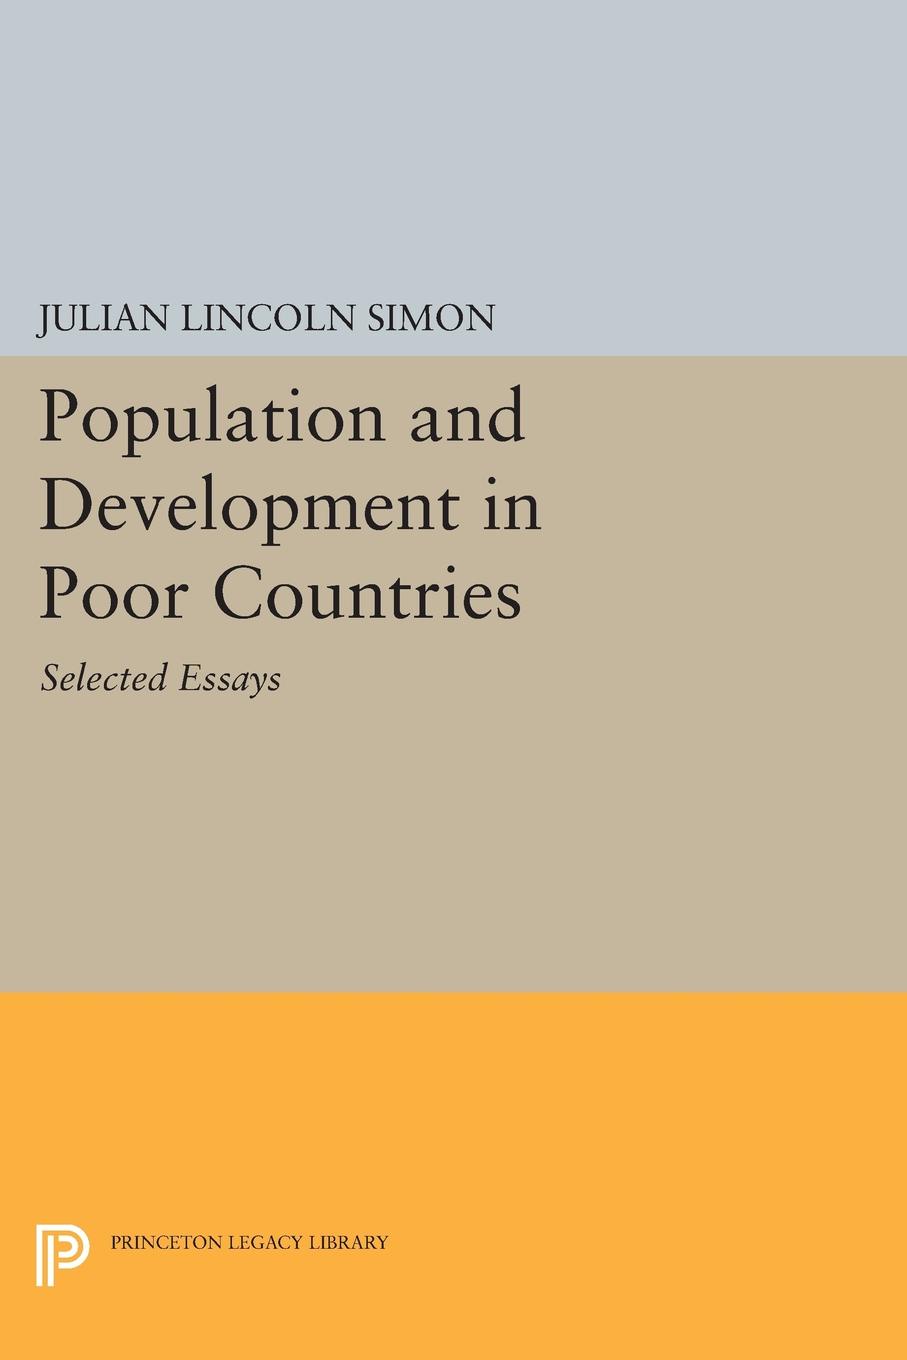 Population and Development in Poor Countries. Selected Essays